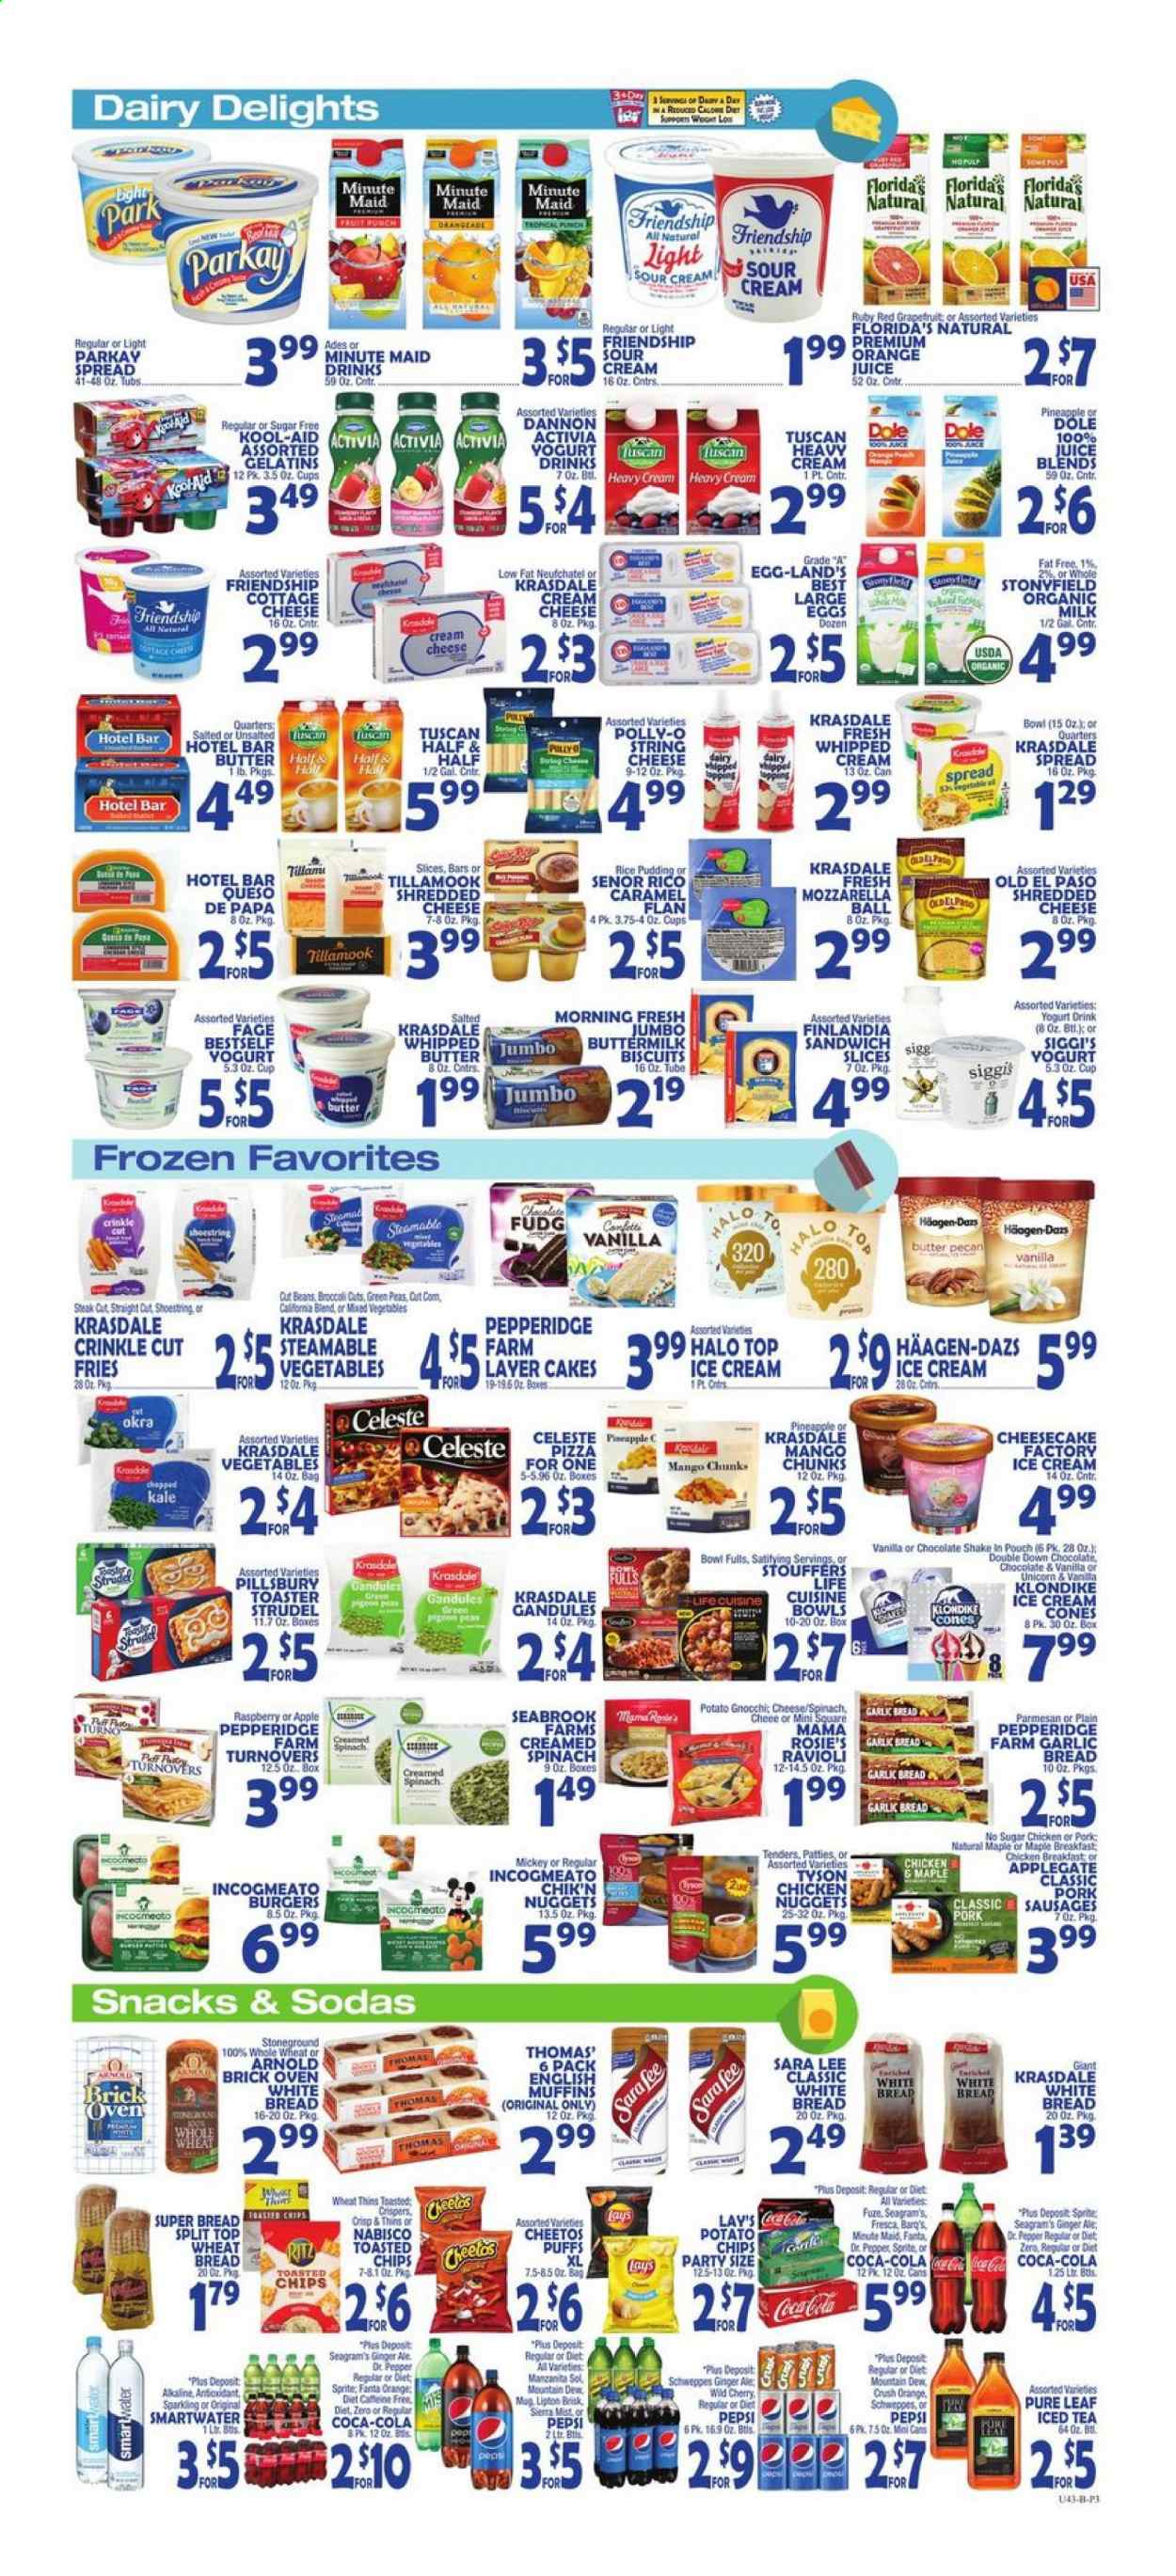 thumbnail - Bravo Supermarkets Flyer - 04/16/2021 - 04/22/2021 - Sales products - english muffins, wheat bread, white bread, strudel, Old El Paso, Sara Lee, turnovers, puffs, broccoli, kale, okra, Dole, mango, gnocchi, ravioli, pizza, sandwich, nuggets, hamburger, Pillsbury, chicken nuggets, sausage, cottage cheese, cream cheese, sandwich slices, shredded cheese, string cheese, parmesan, pudding, yoghurt, Activia, Dannon, buttermilk, organic milk, yoghurt drink, shake, large eggs, whipped butter, sour cream, whipped cream, ice cream, Häagen-Dazs, potato fries, Celeste, snack, biscuit, Florida's Natural, RITZ, potato chips, Cheetos, Lay’s, Thins, rice, caramel, Coca-Cola, ginger ale, Mountain Dew, Schweppes, Sprite, Pepsi, orange juice, juice, Fanta, Lipton, ice tea, fruit punch, Smartwater, Pure Leaf, red wine, wine, Sol, steak, Half and half. Page 3.